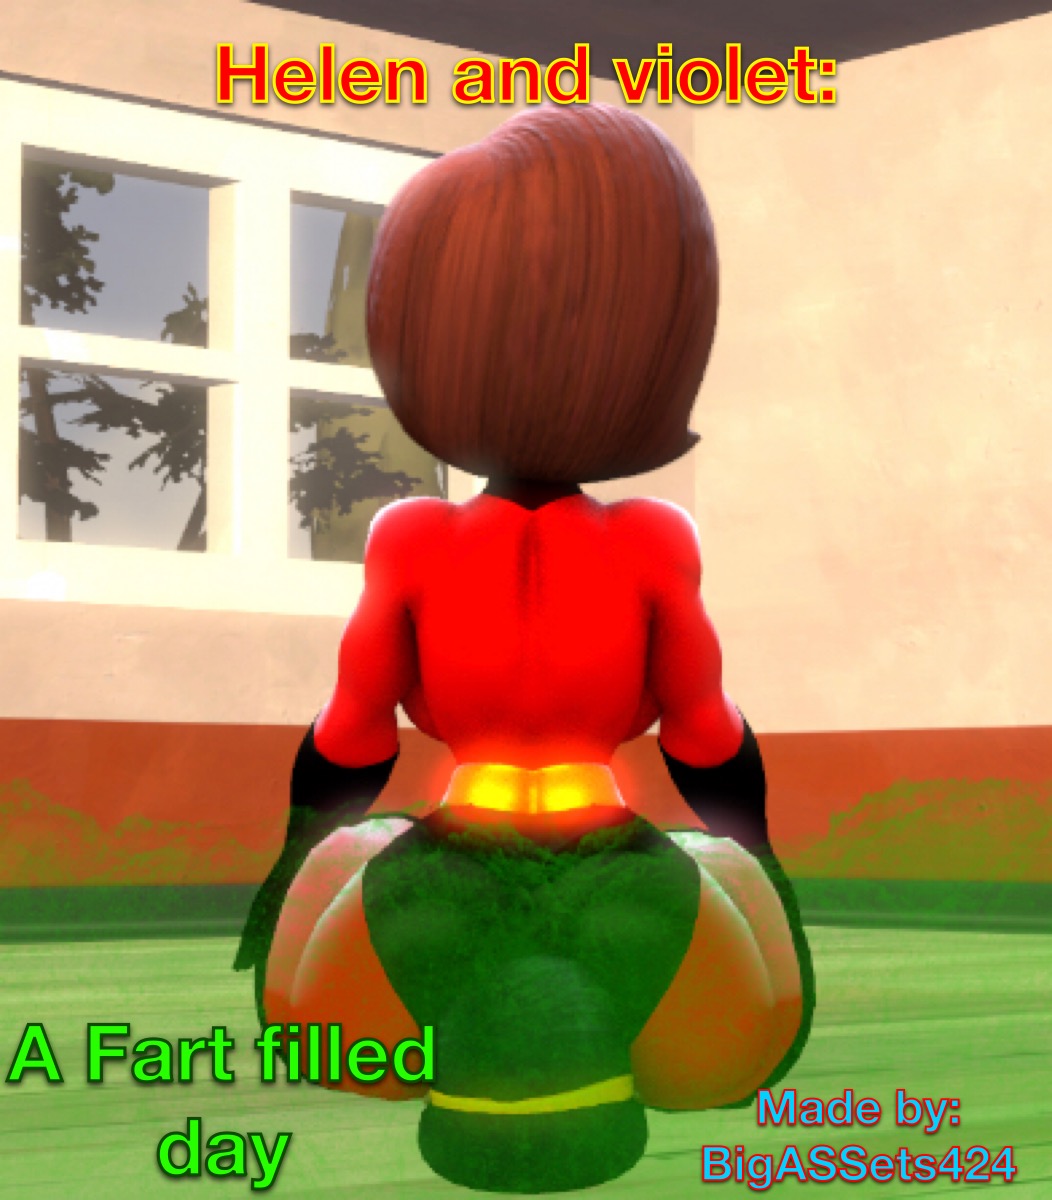 Helen and violet: a fart filled day